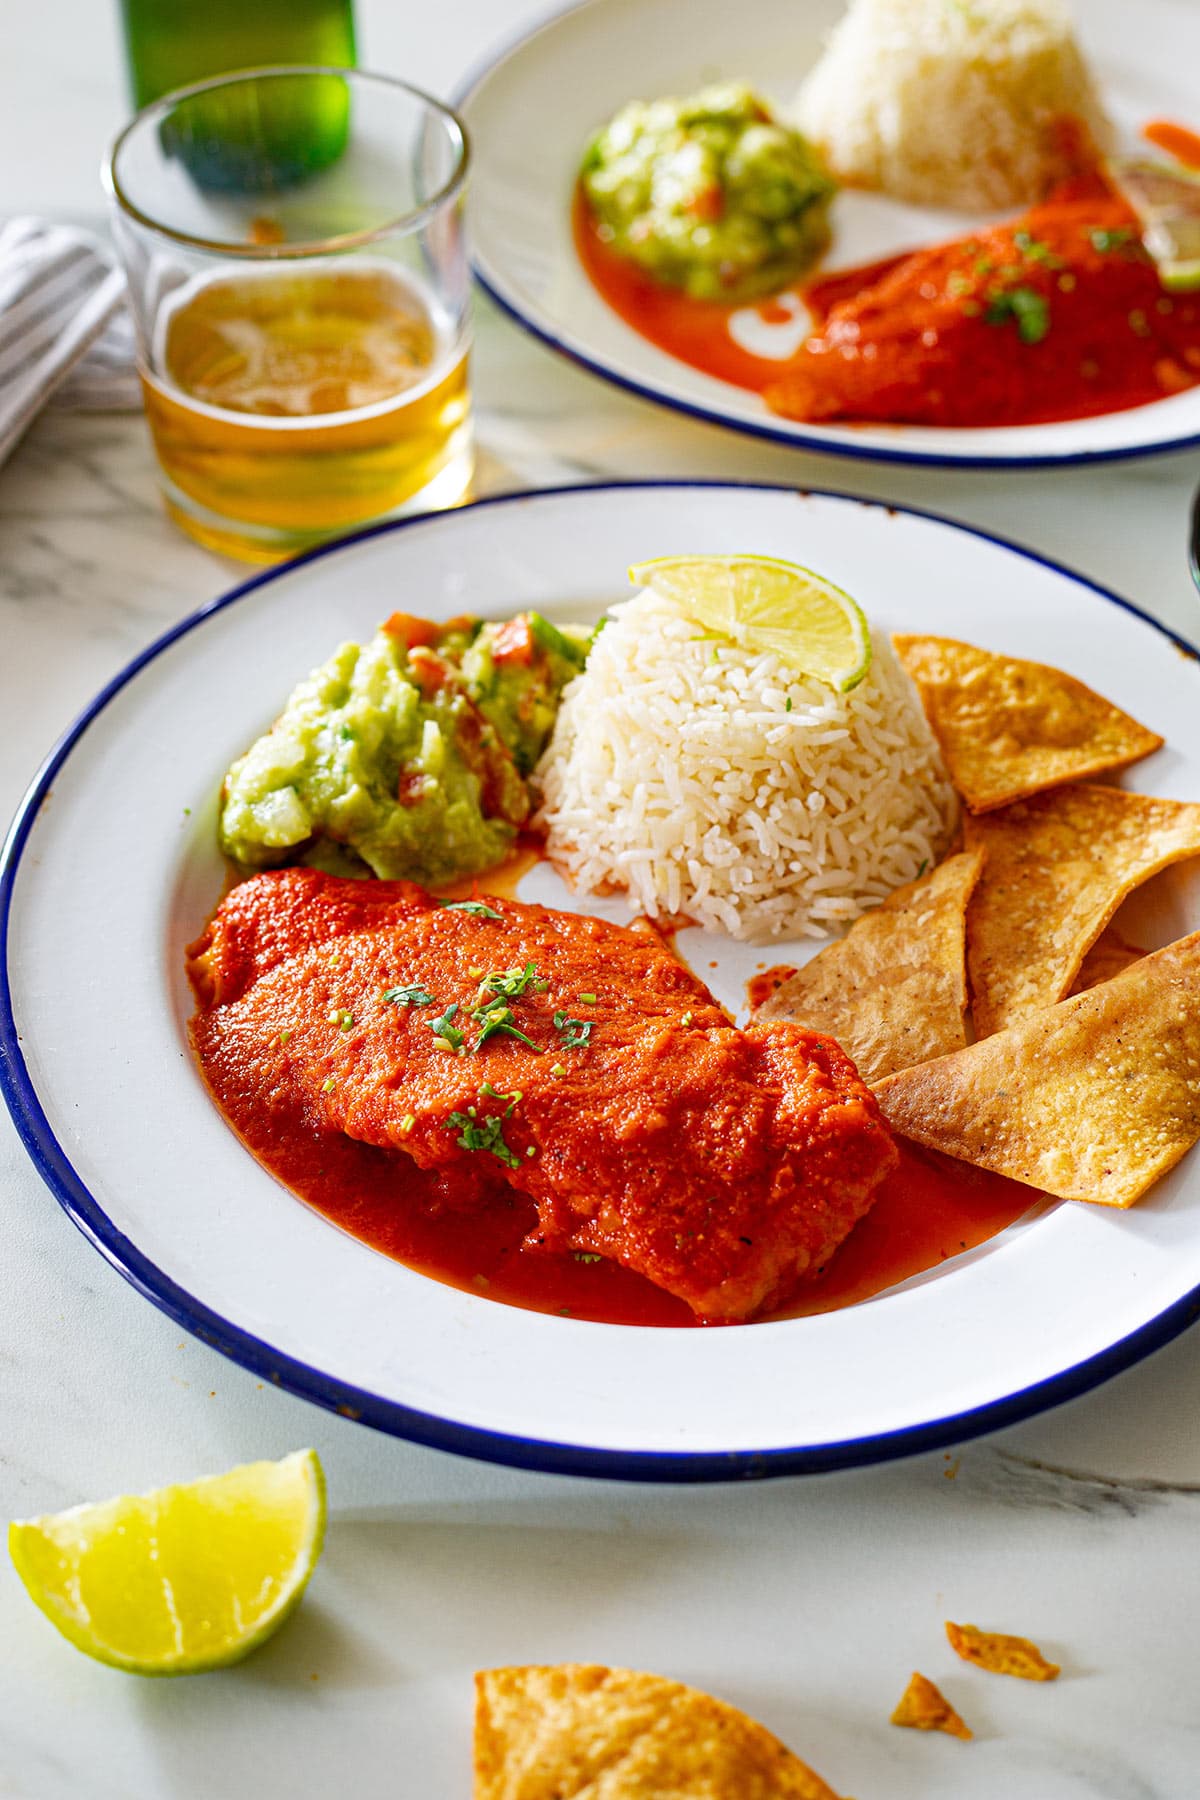 Pescado a la diabla served in a plate with buttery rice, guacamole, and tortilla chips on the side.